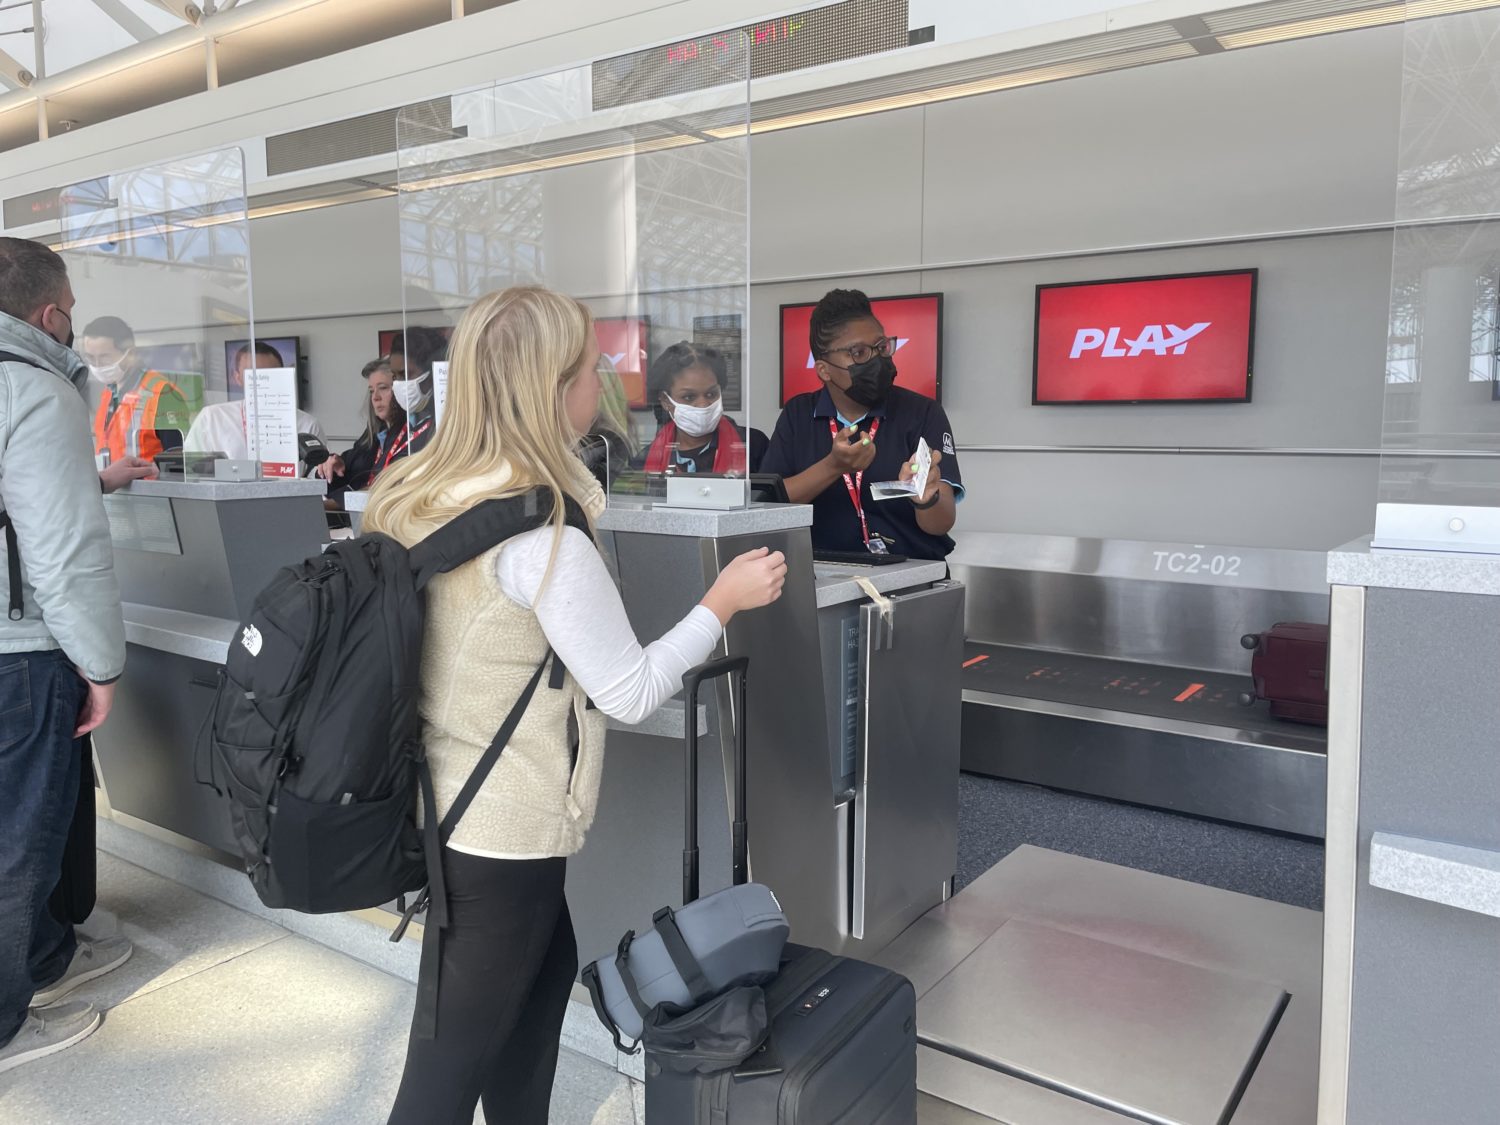 PLAY Airlines check-in desk